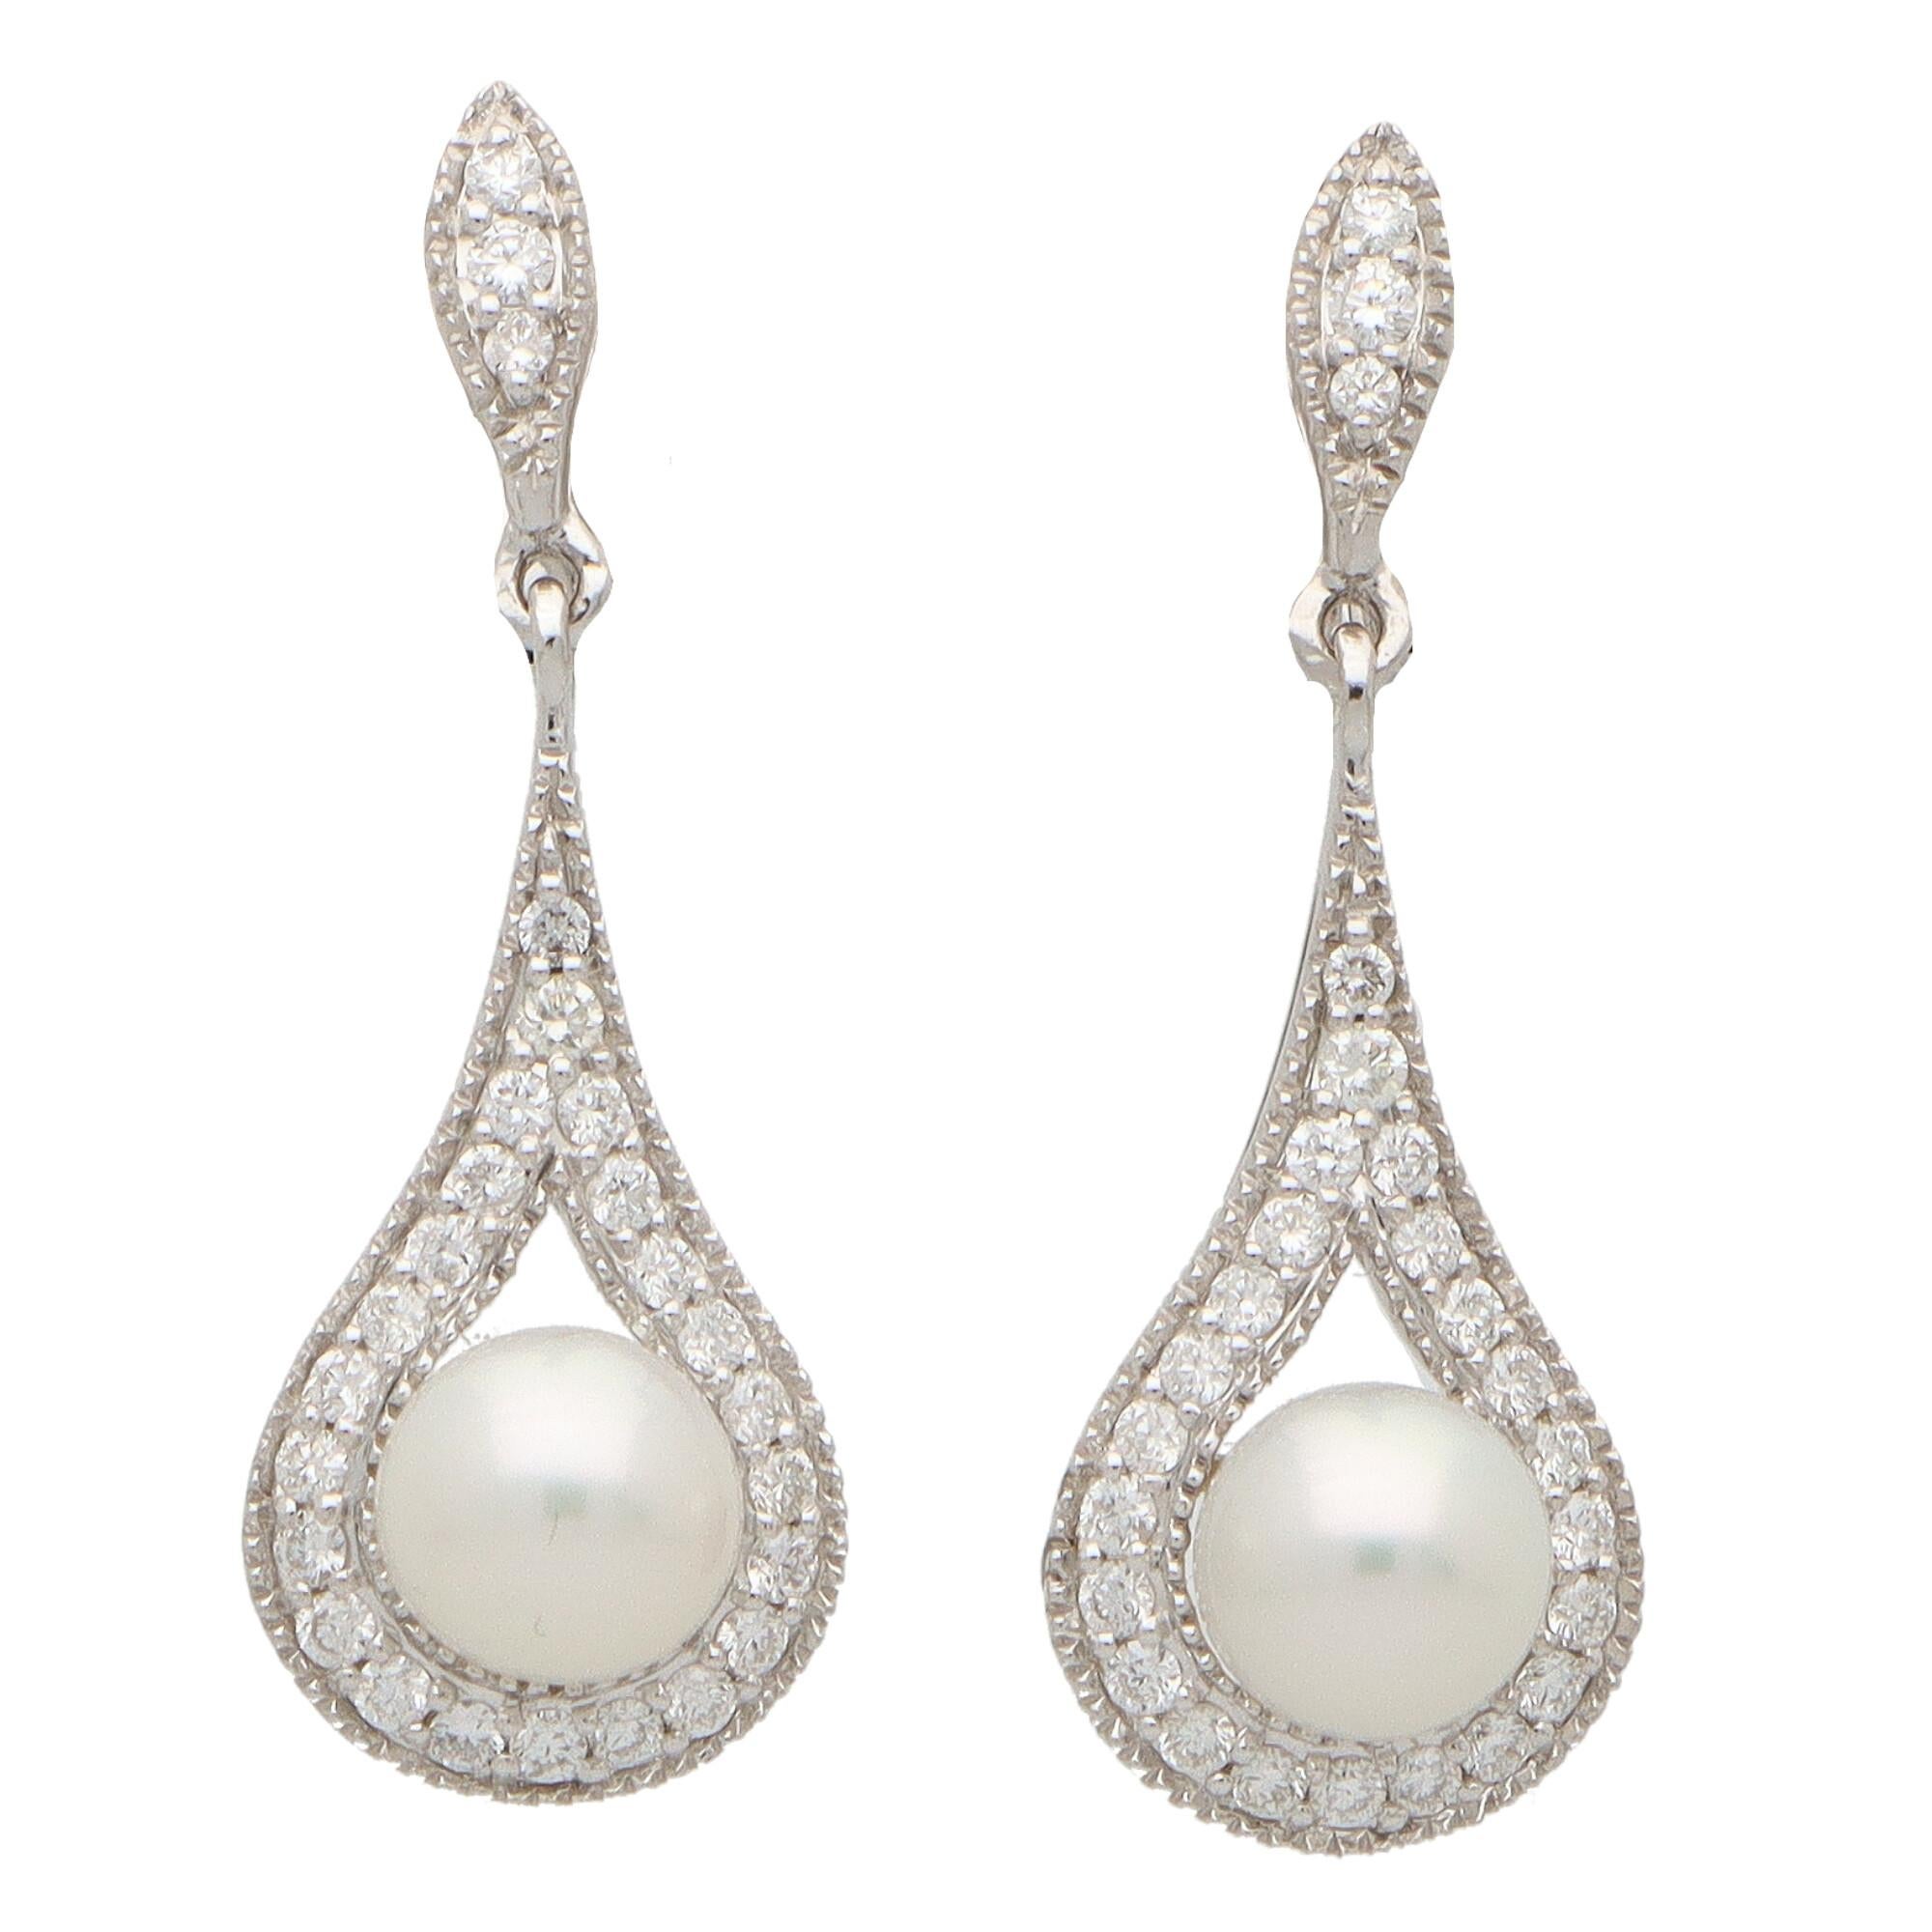 Modern Contemporary Diamond and Pearl Drop Earrings Set in 18k White Gold